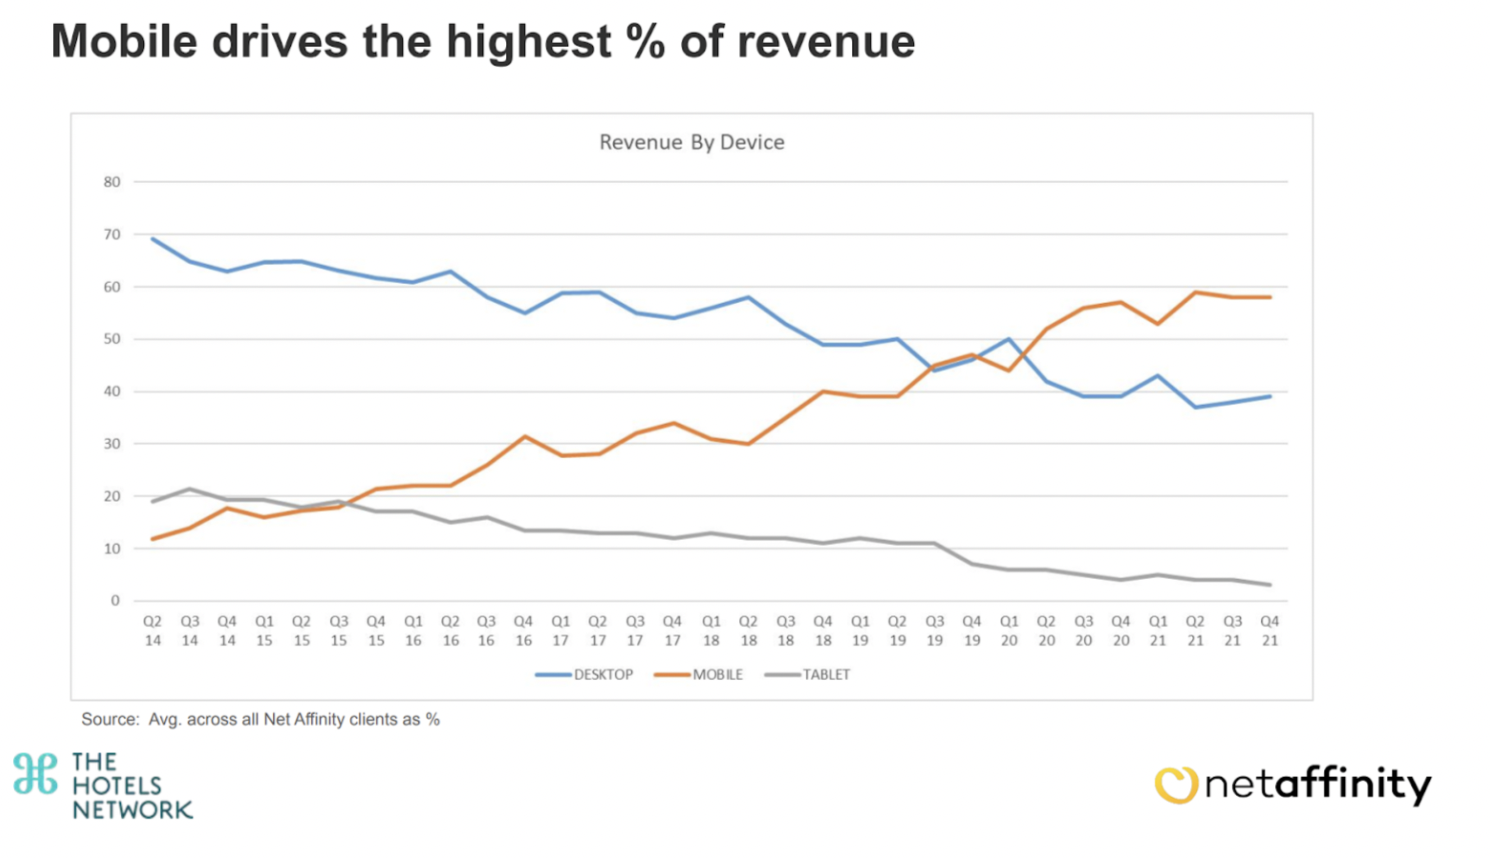 graph of mobile driving highest revenue for hotels